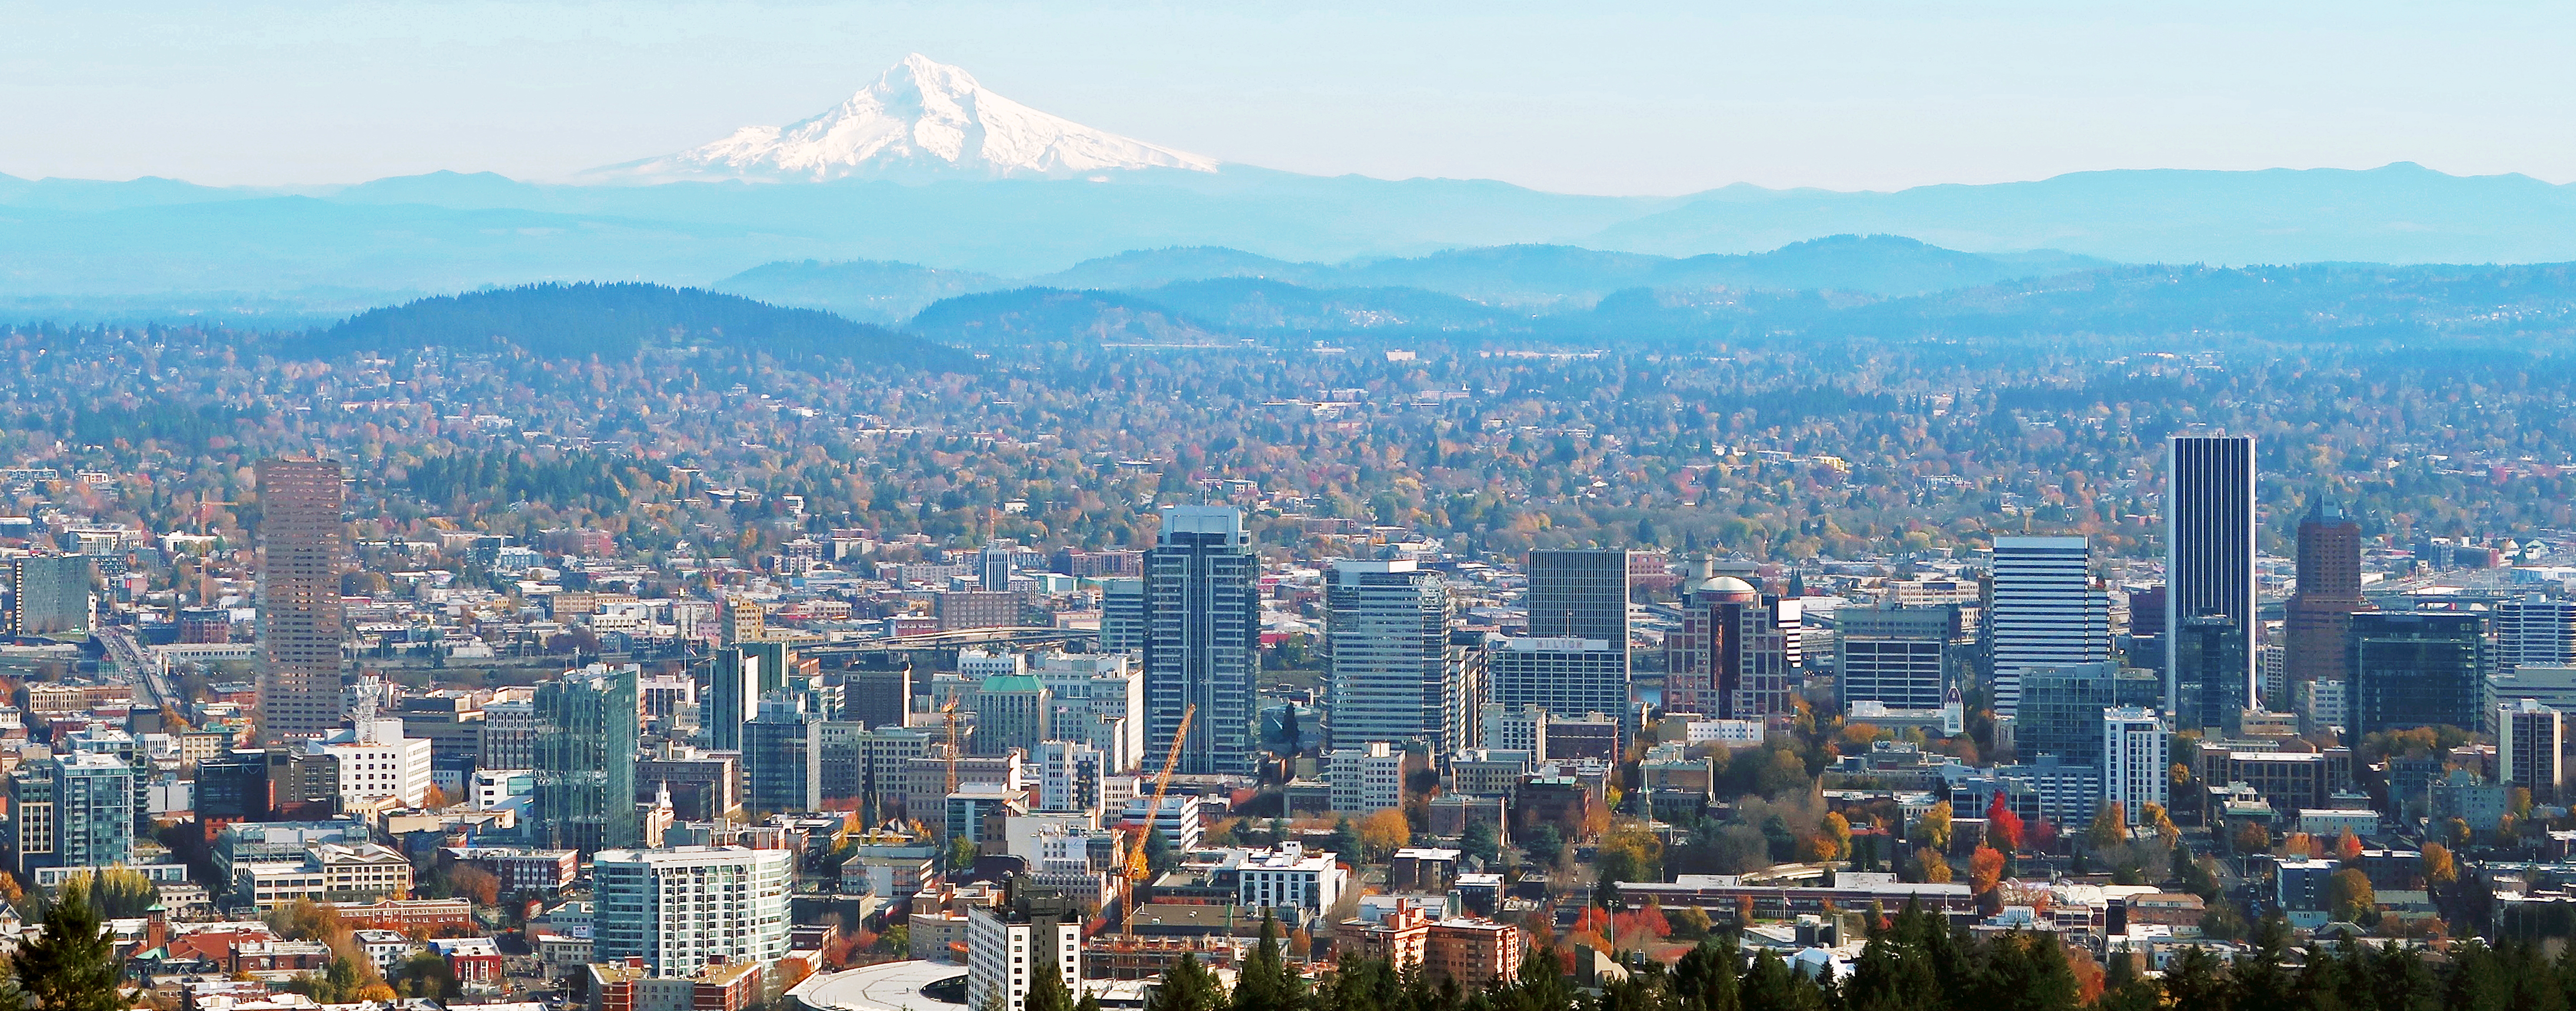 an image of mt hood from the pittock mansion